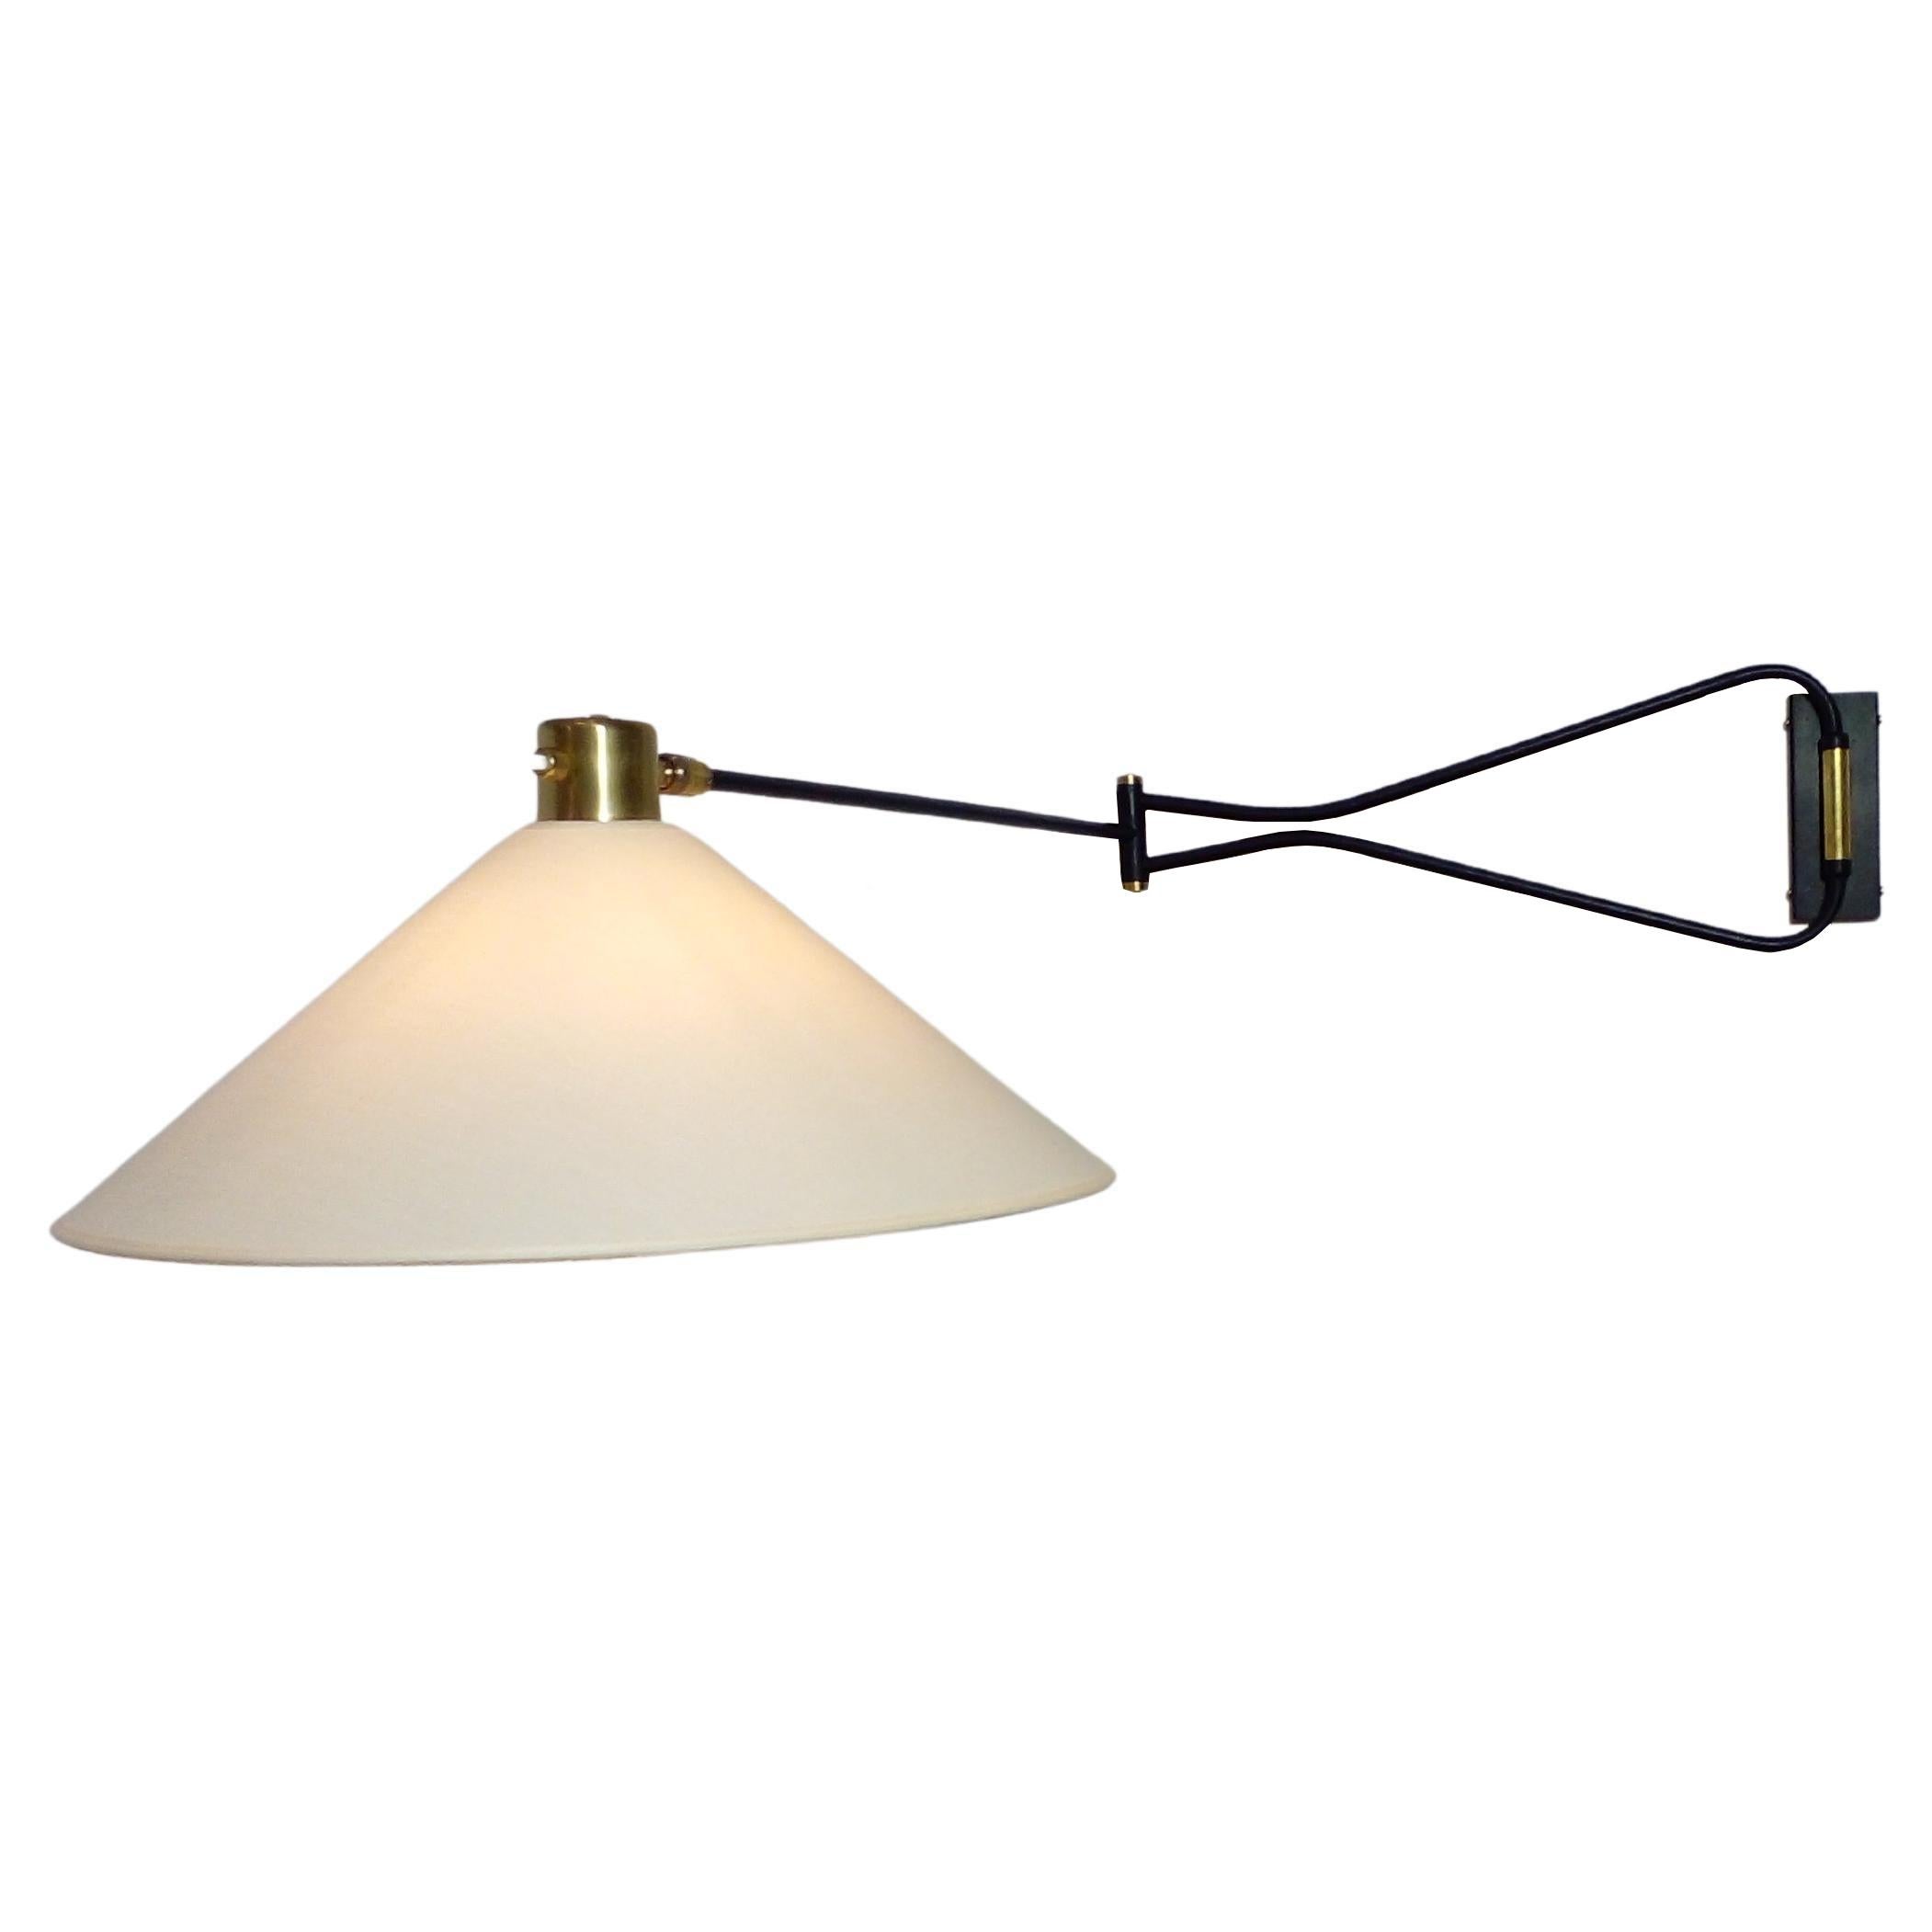 Mid-20th Century Foldable and Adjustable Wall Lamp by Arlus, France circa 1950